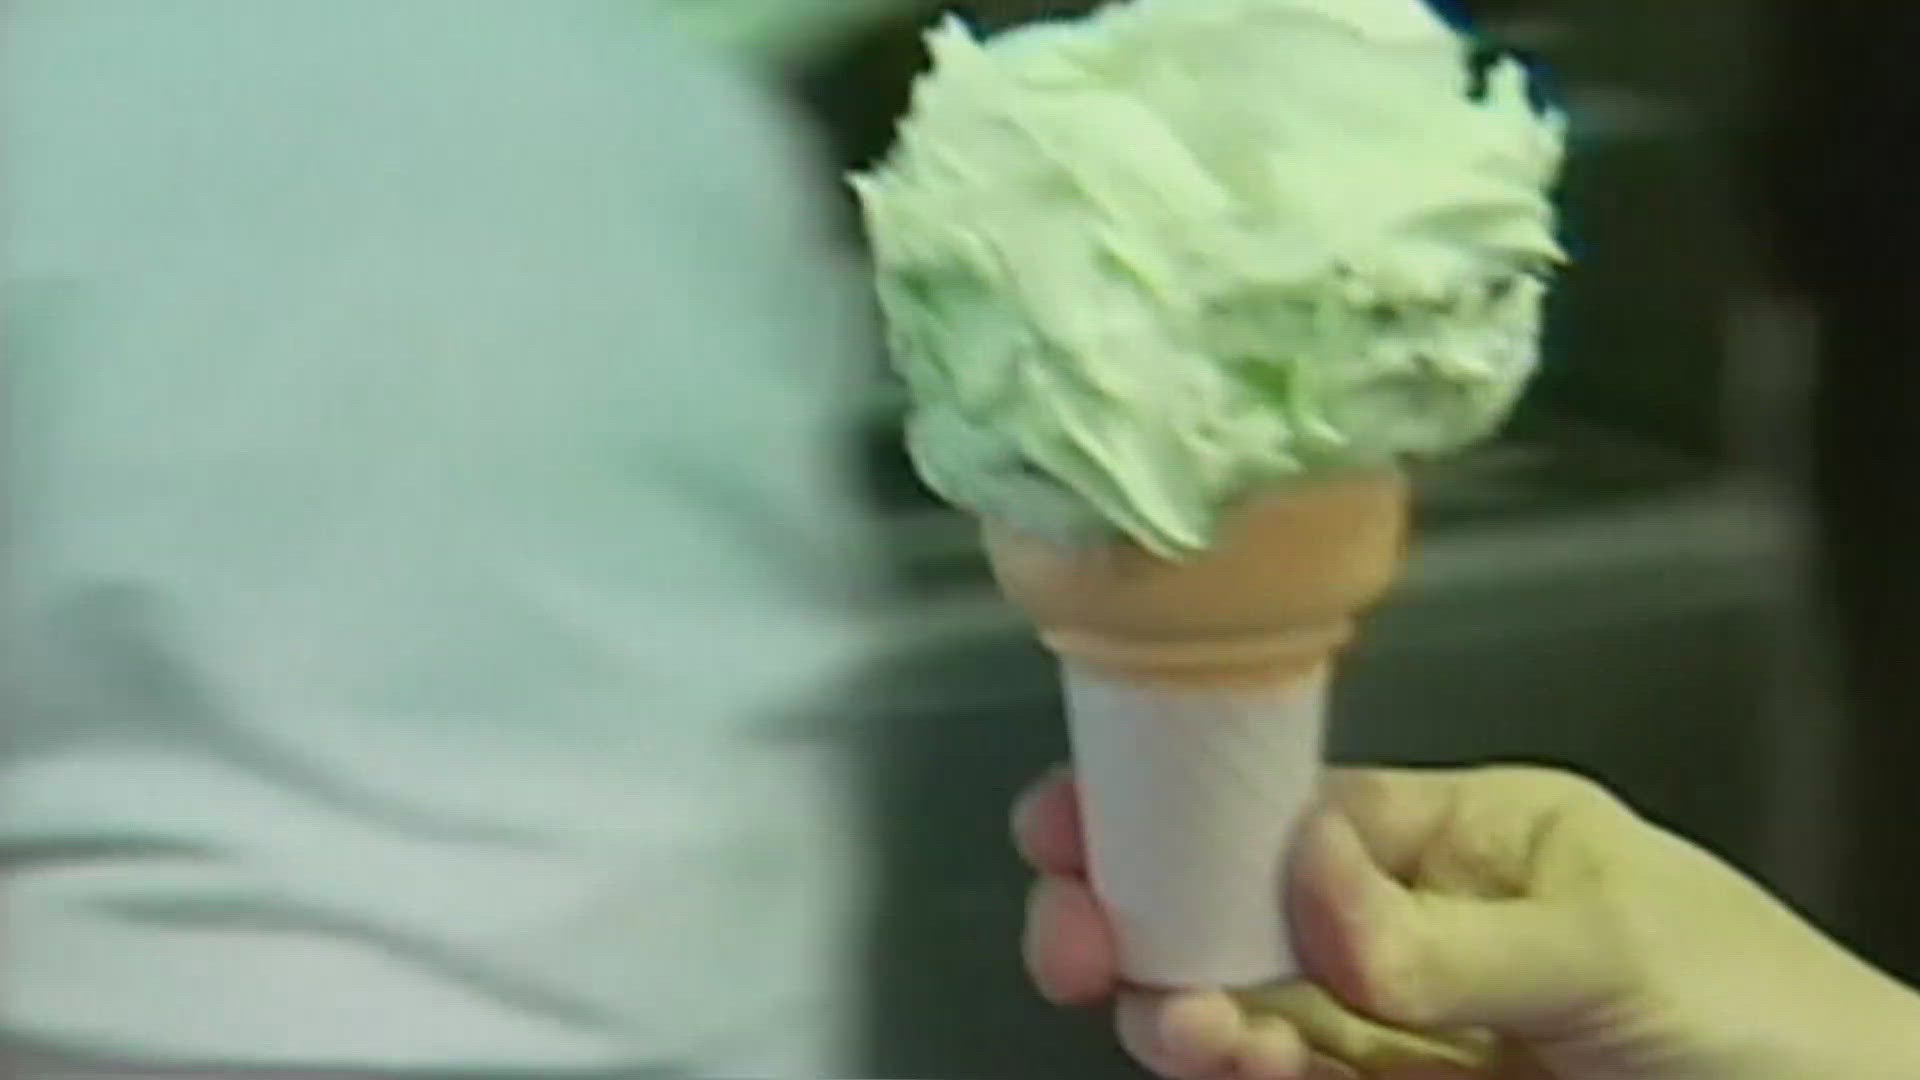 A women from Long Island is suing Cold Stone Creamery because she claims there were no pistachios in her pistachio ice cream.